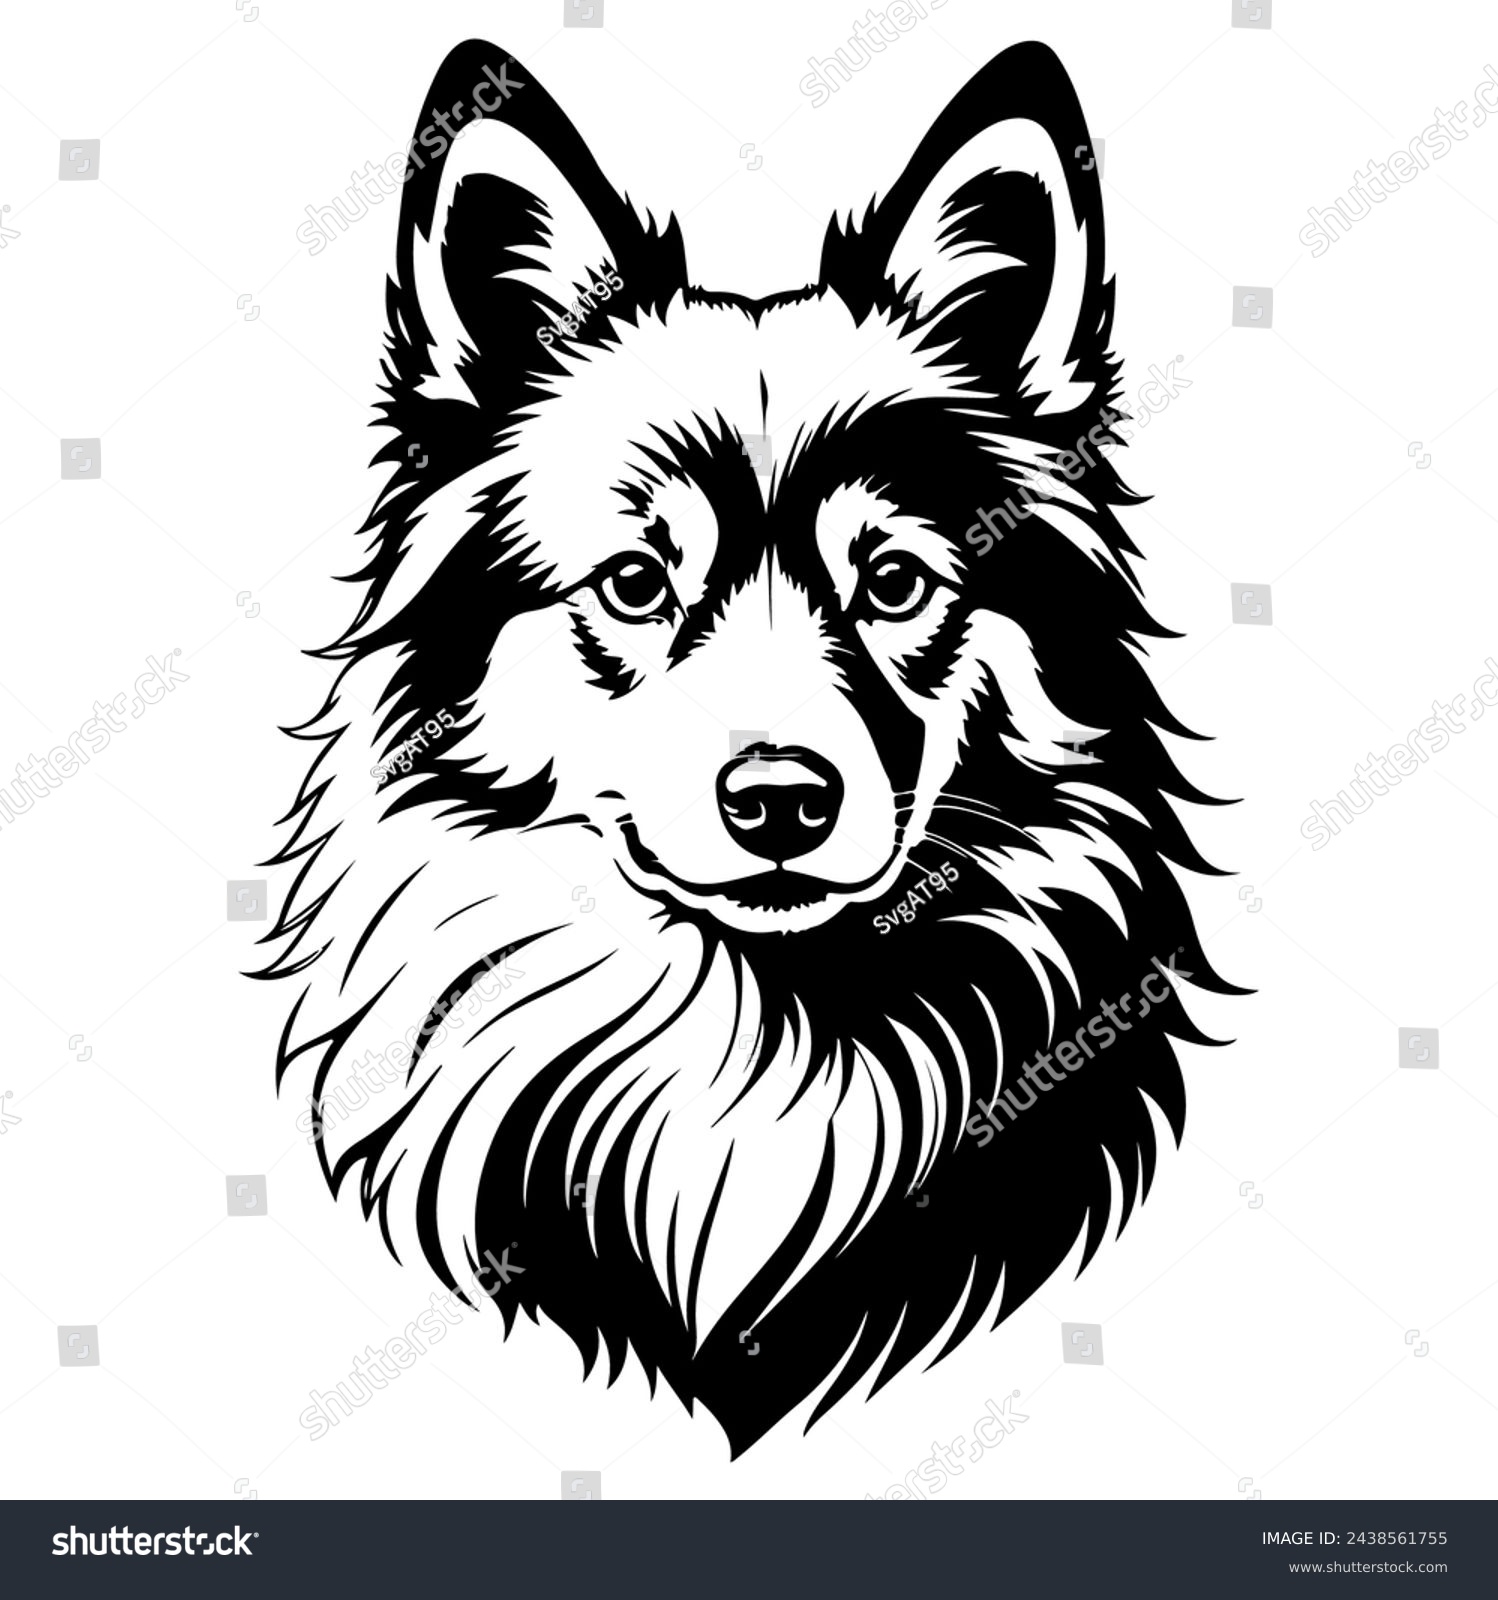 SVG of Portrait of a Icelandic Sheepdog Dog Vector isolated on white background, Dog Silhouettes. svg